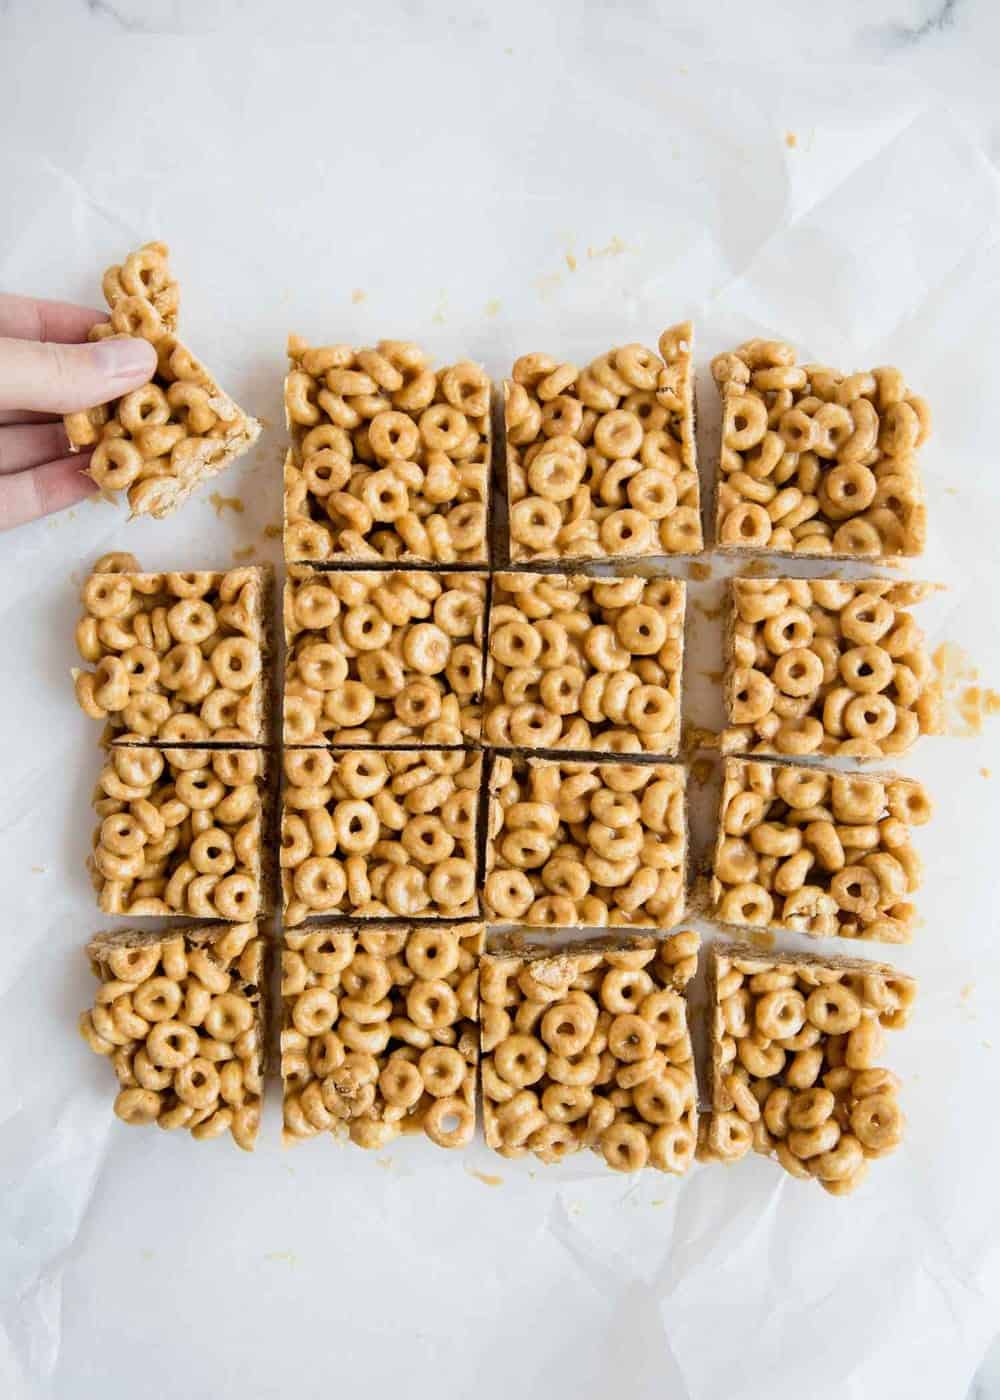 Homemade cereal bars cut into squares.